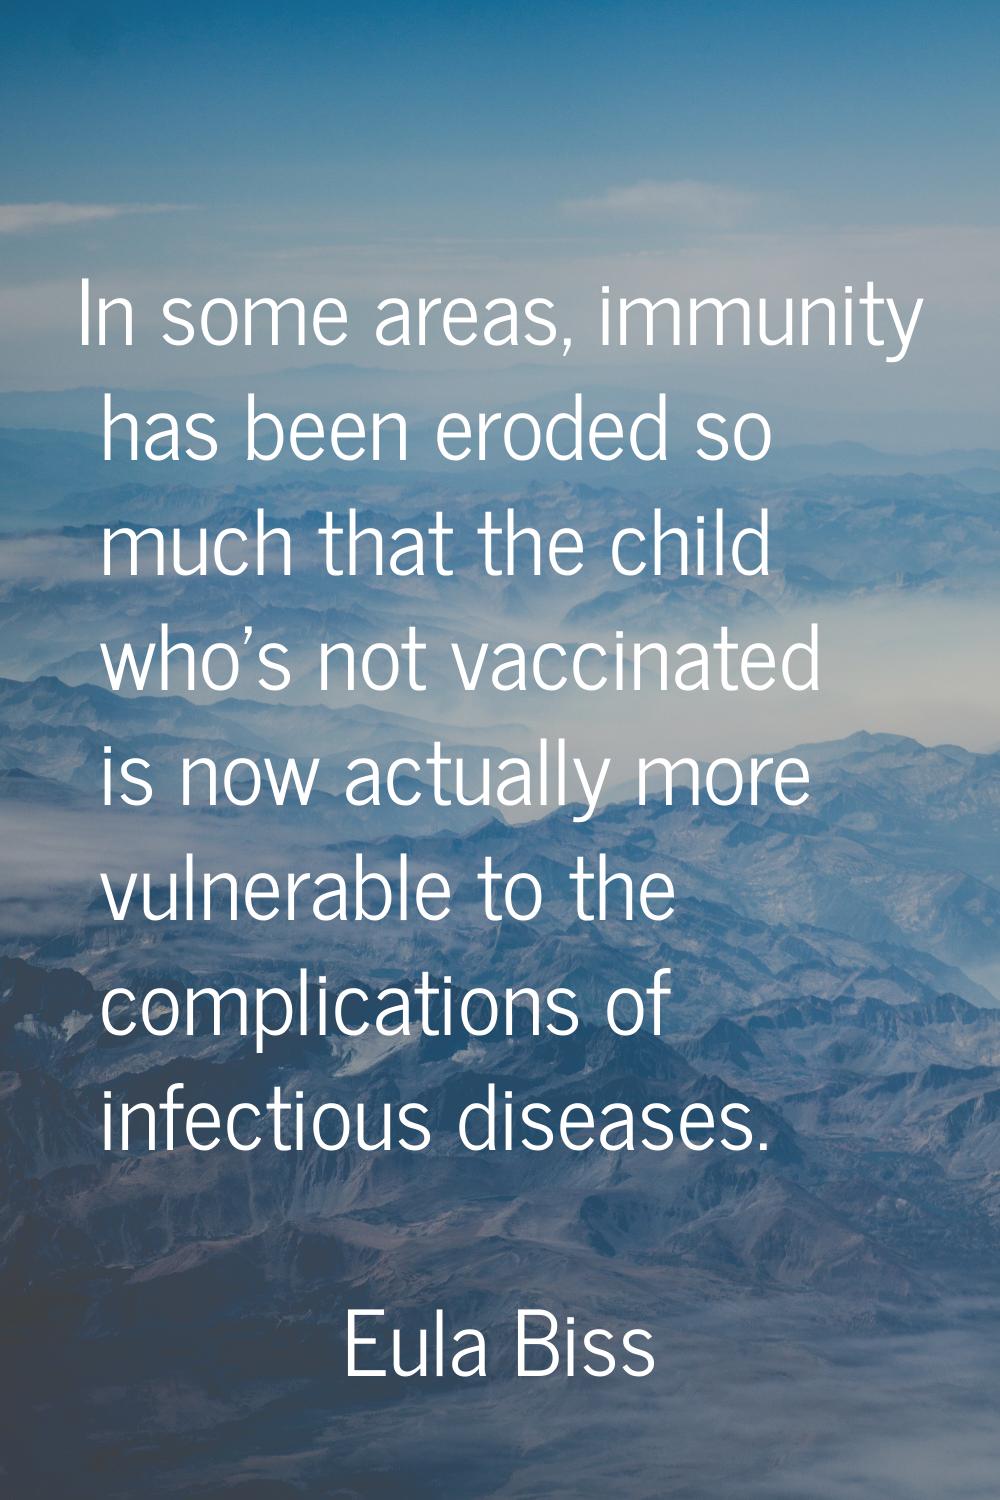 In some areas, immunity has been eroded so much that the child who's not vaccinated is now actually